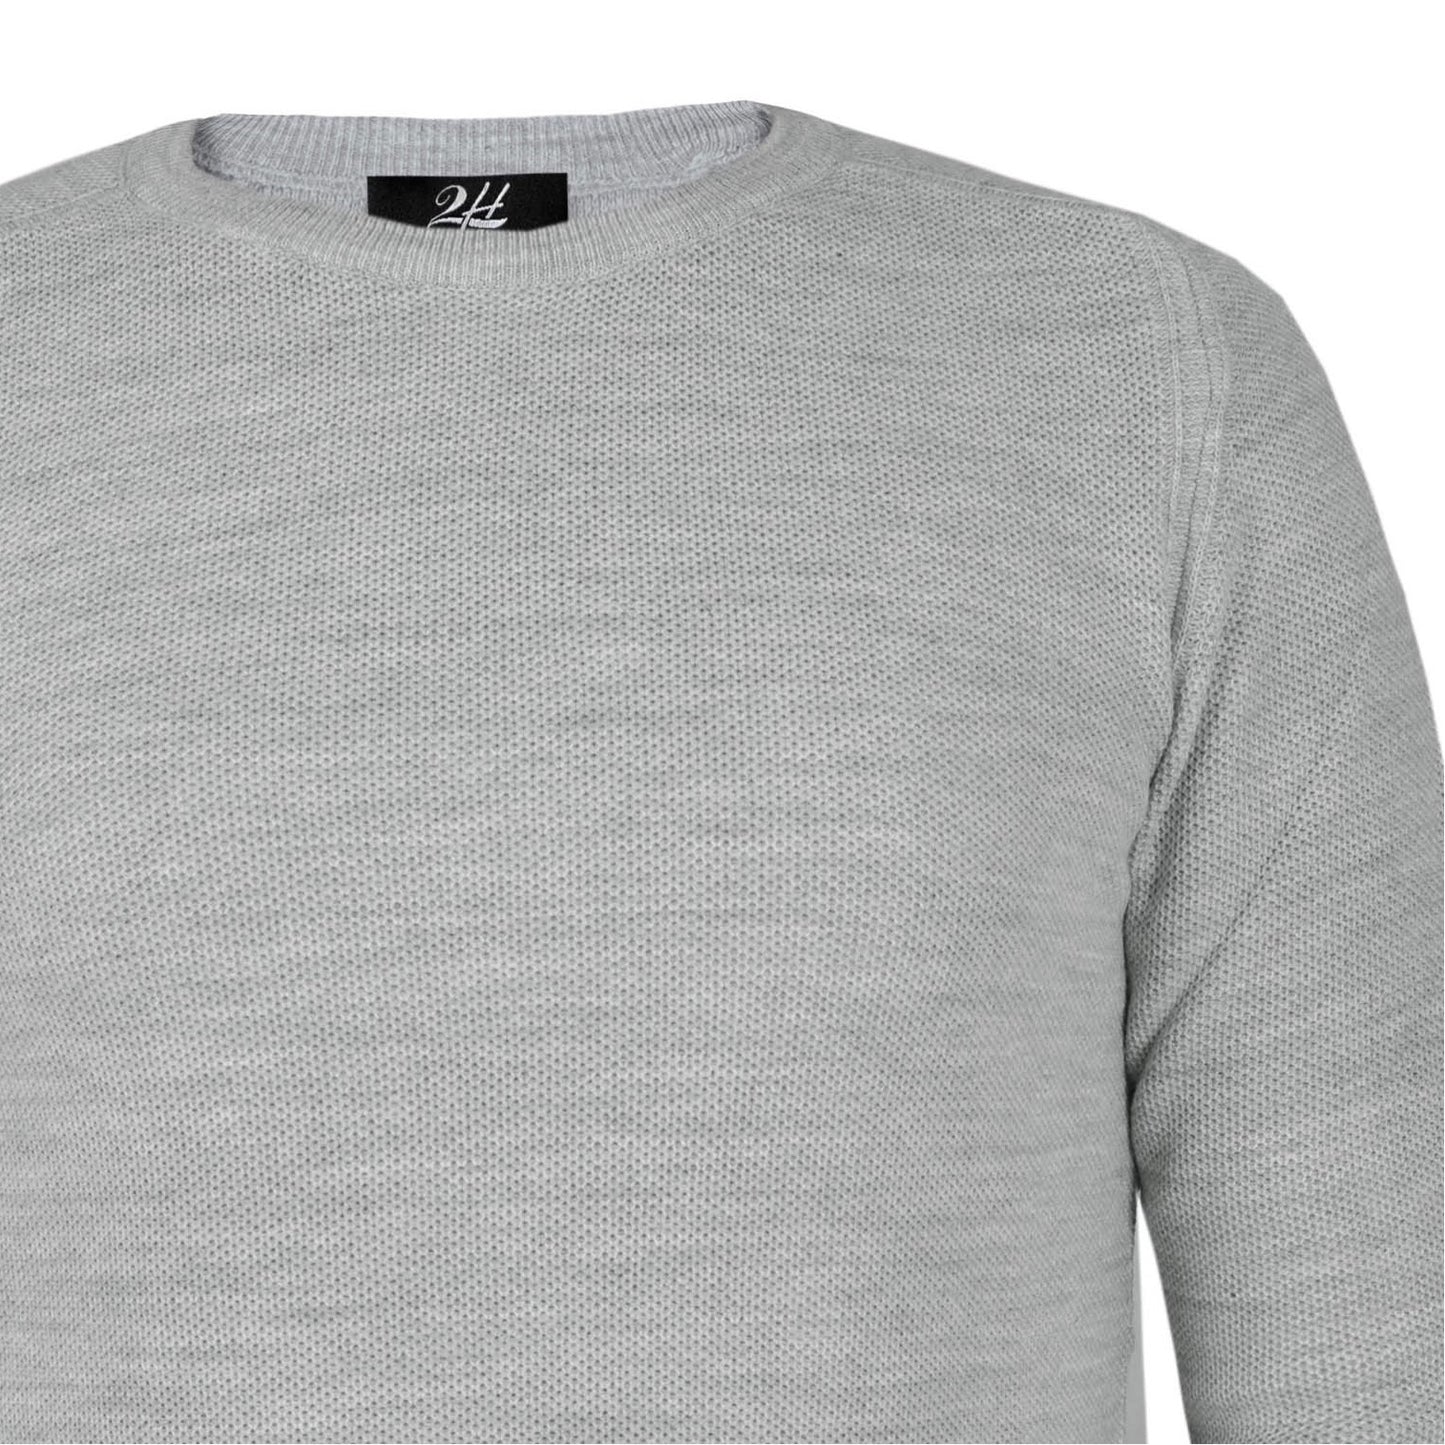 SALE! 2H Grey Knitted Round Neck Sweater